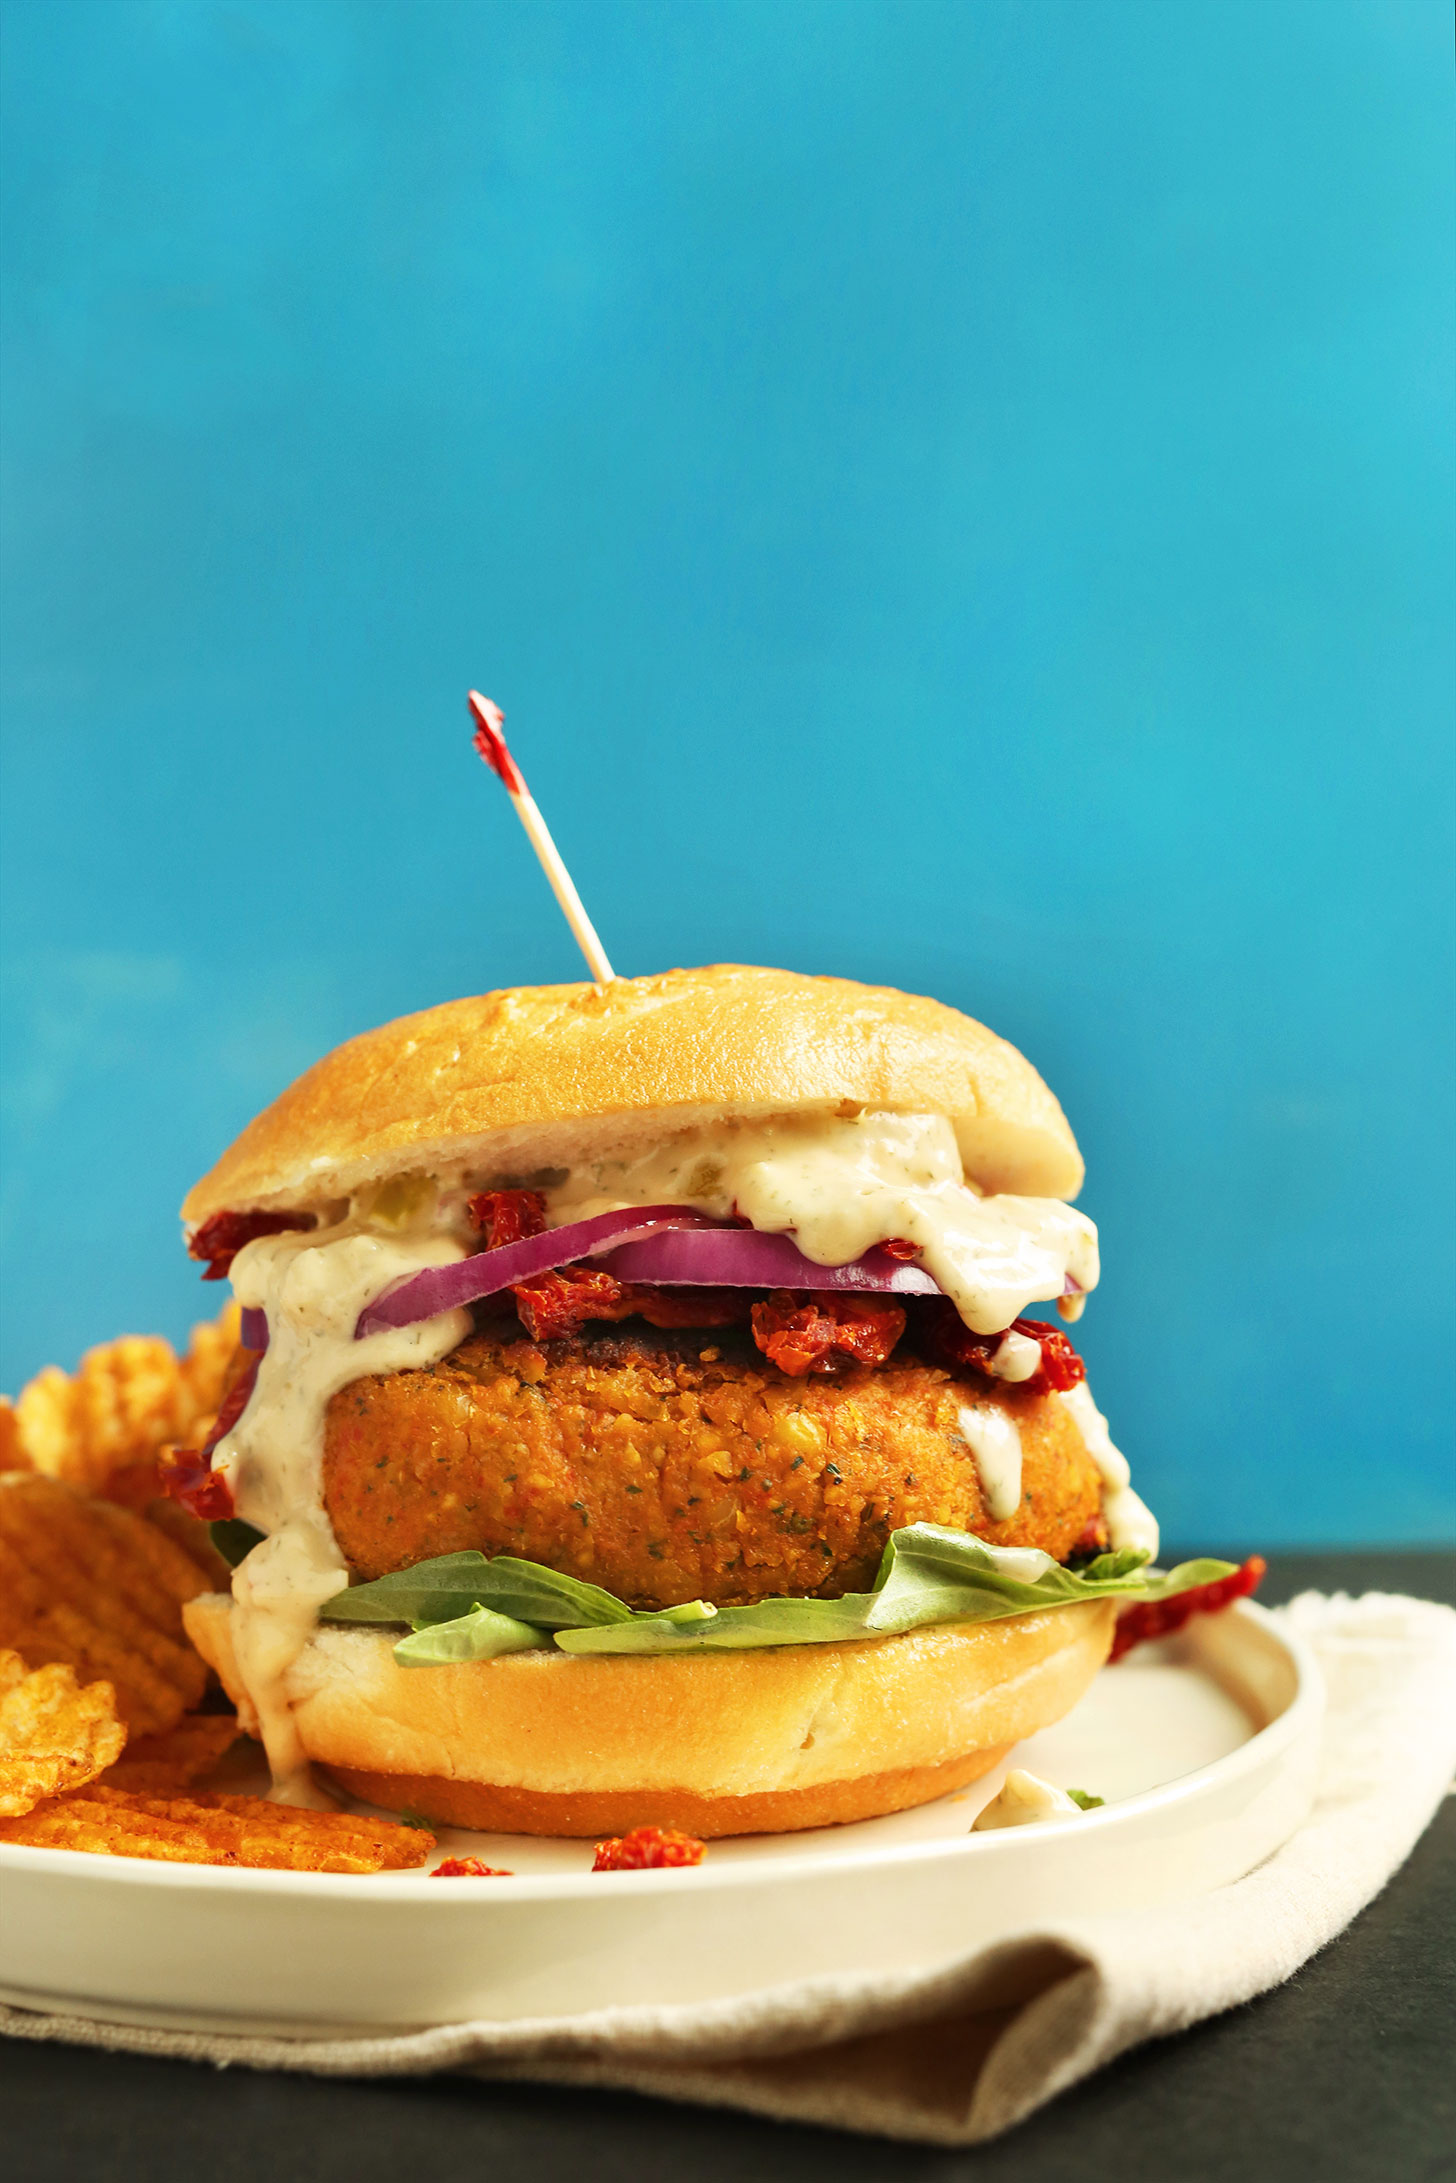 Plate of our Sun-dried Tomato Herbed Chickpea Burger recipe served with chips